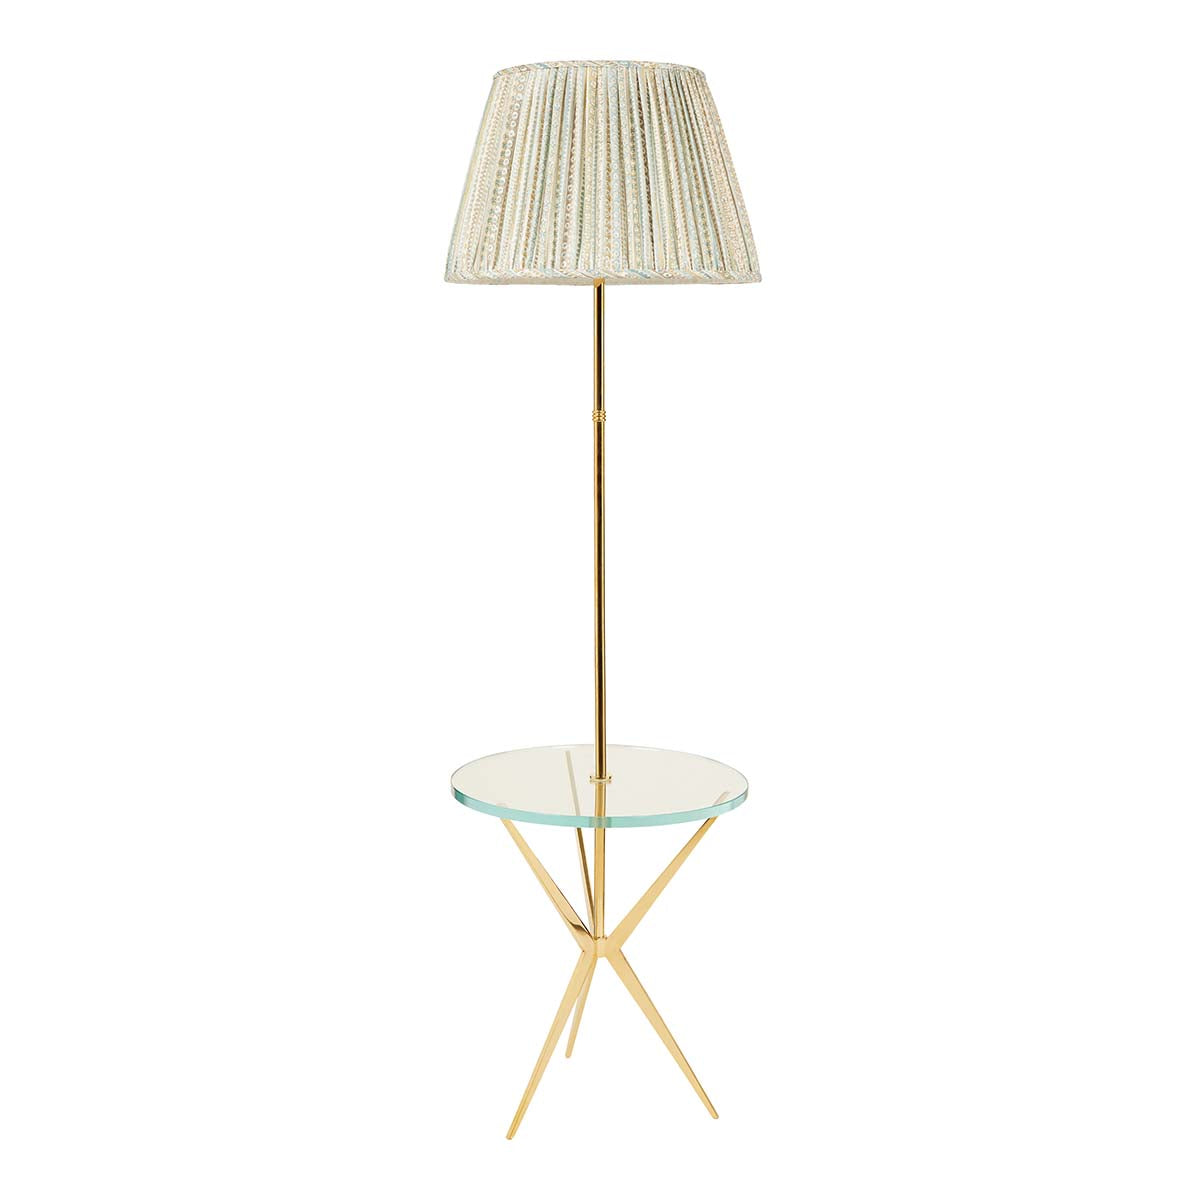 Nina Campbell Arthur Lamp Table in Polished Brass